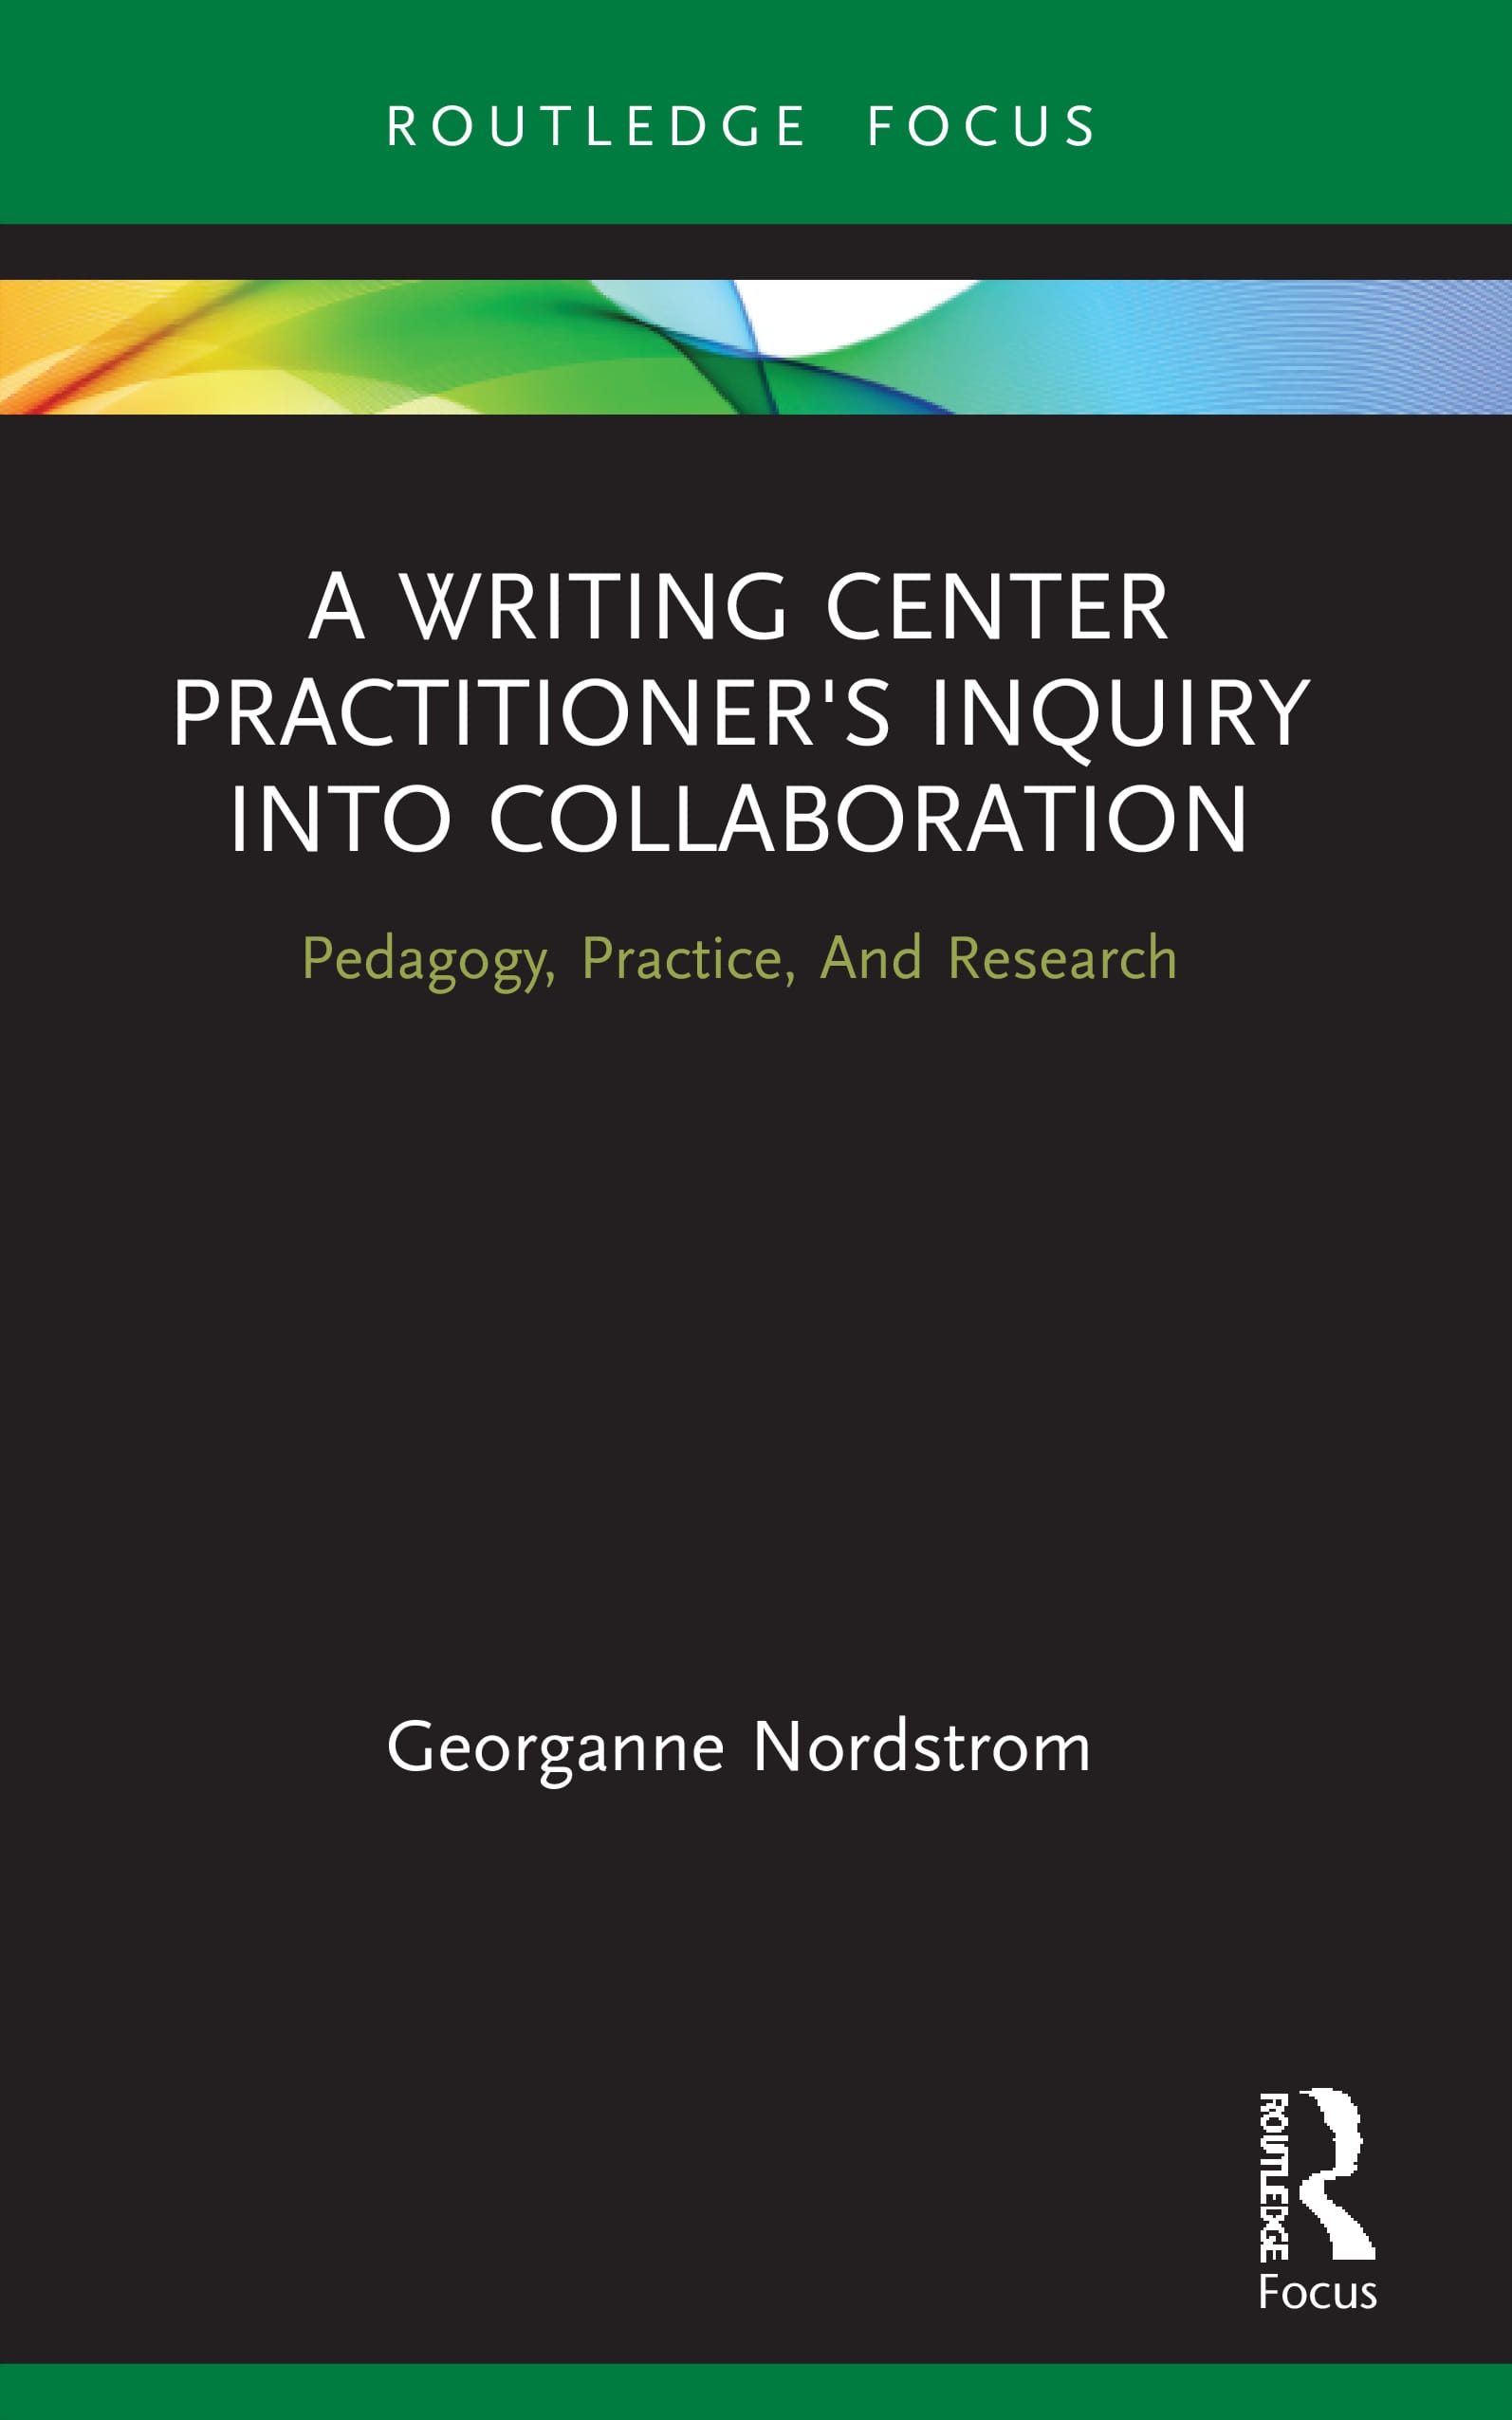 A Writing Center Practitioner’s Inquiry Into Collaboration: Pedagogy, Practice, and Research